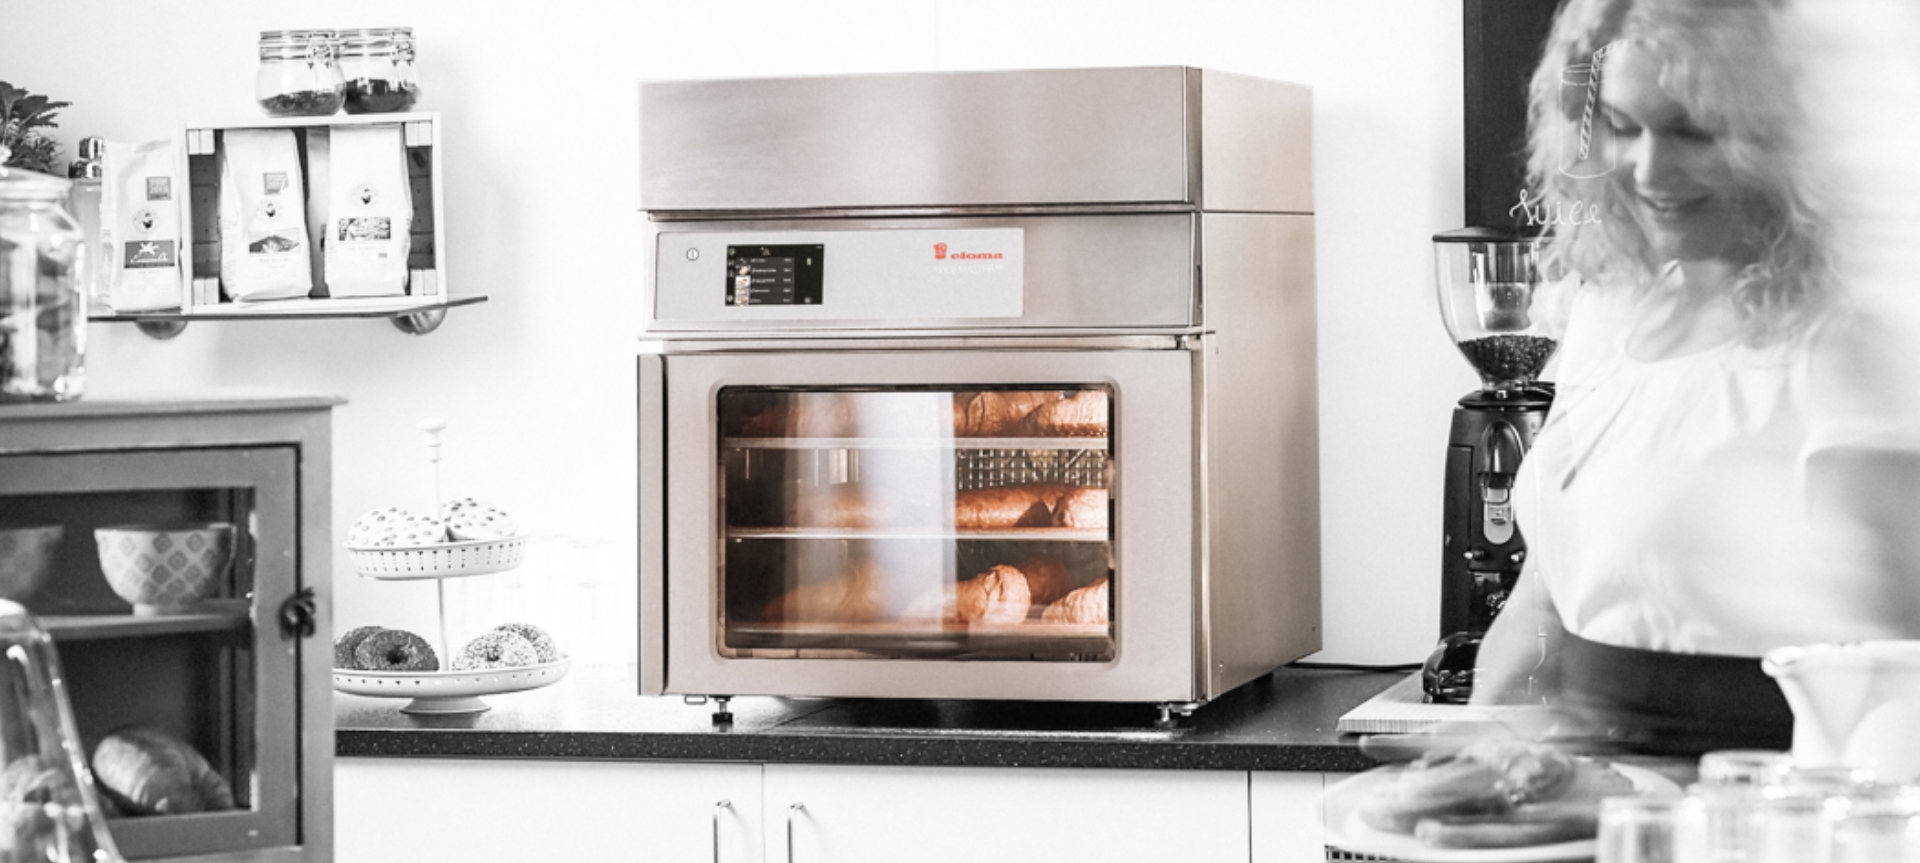 BACKMASTER - baking oven - the perfect shop machine